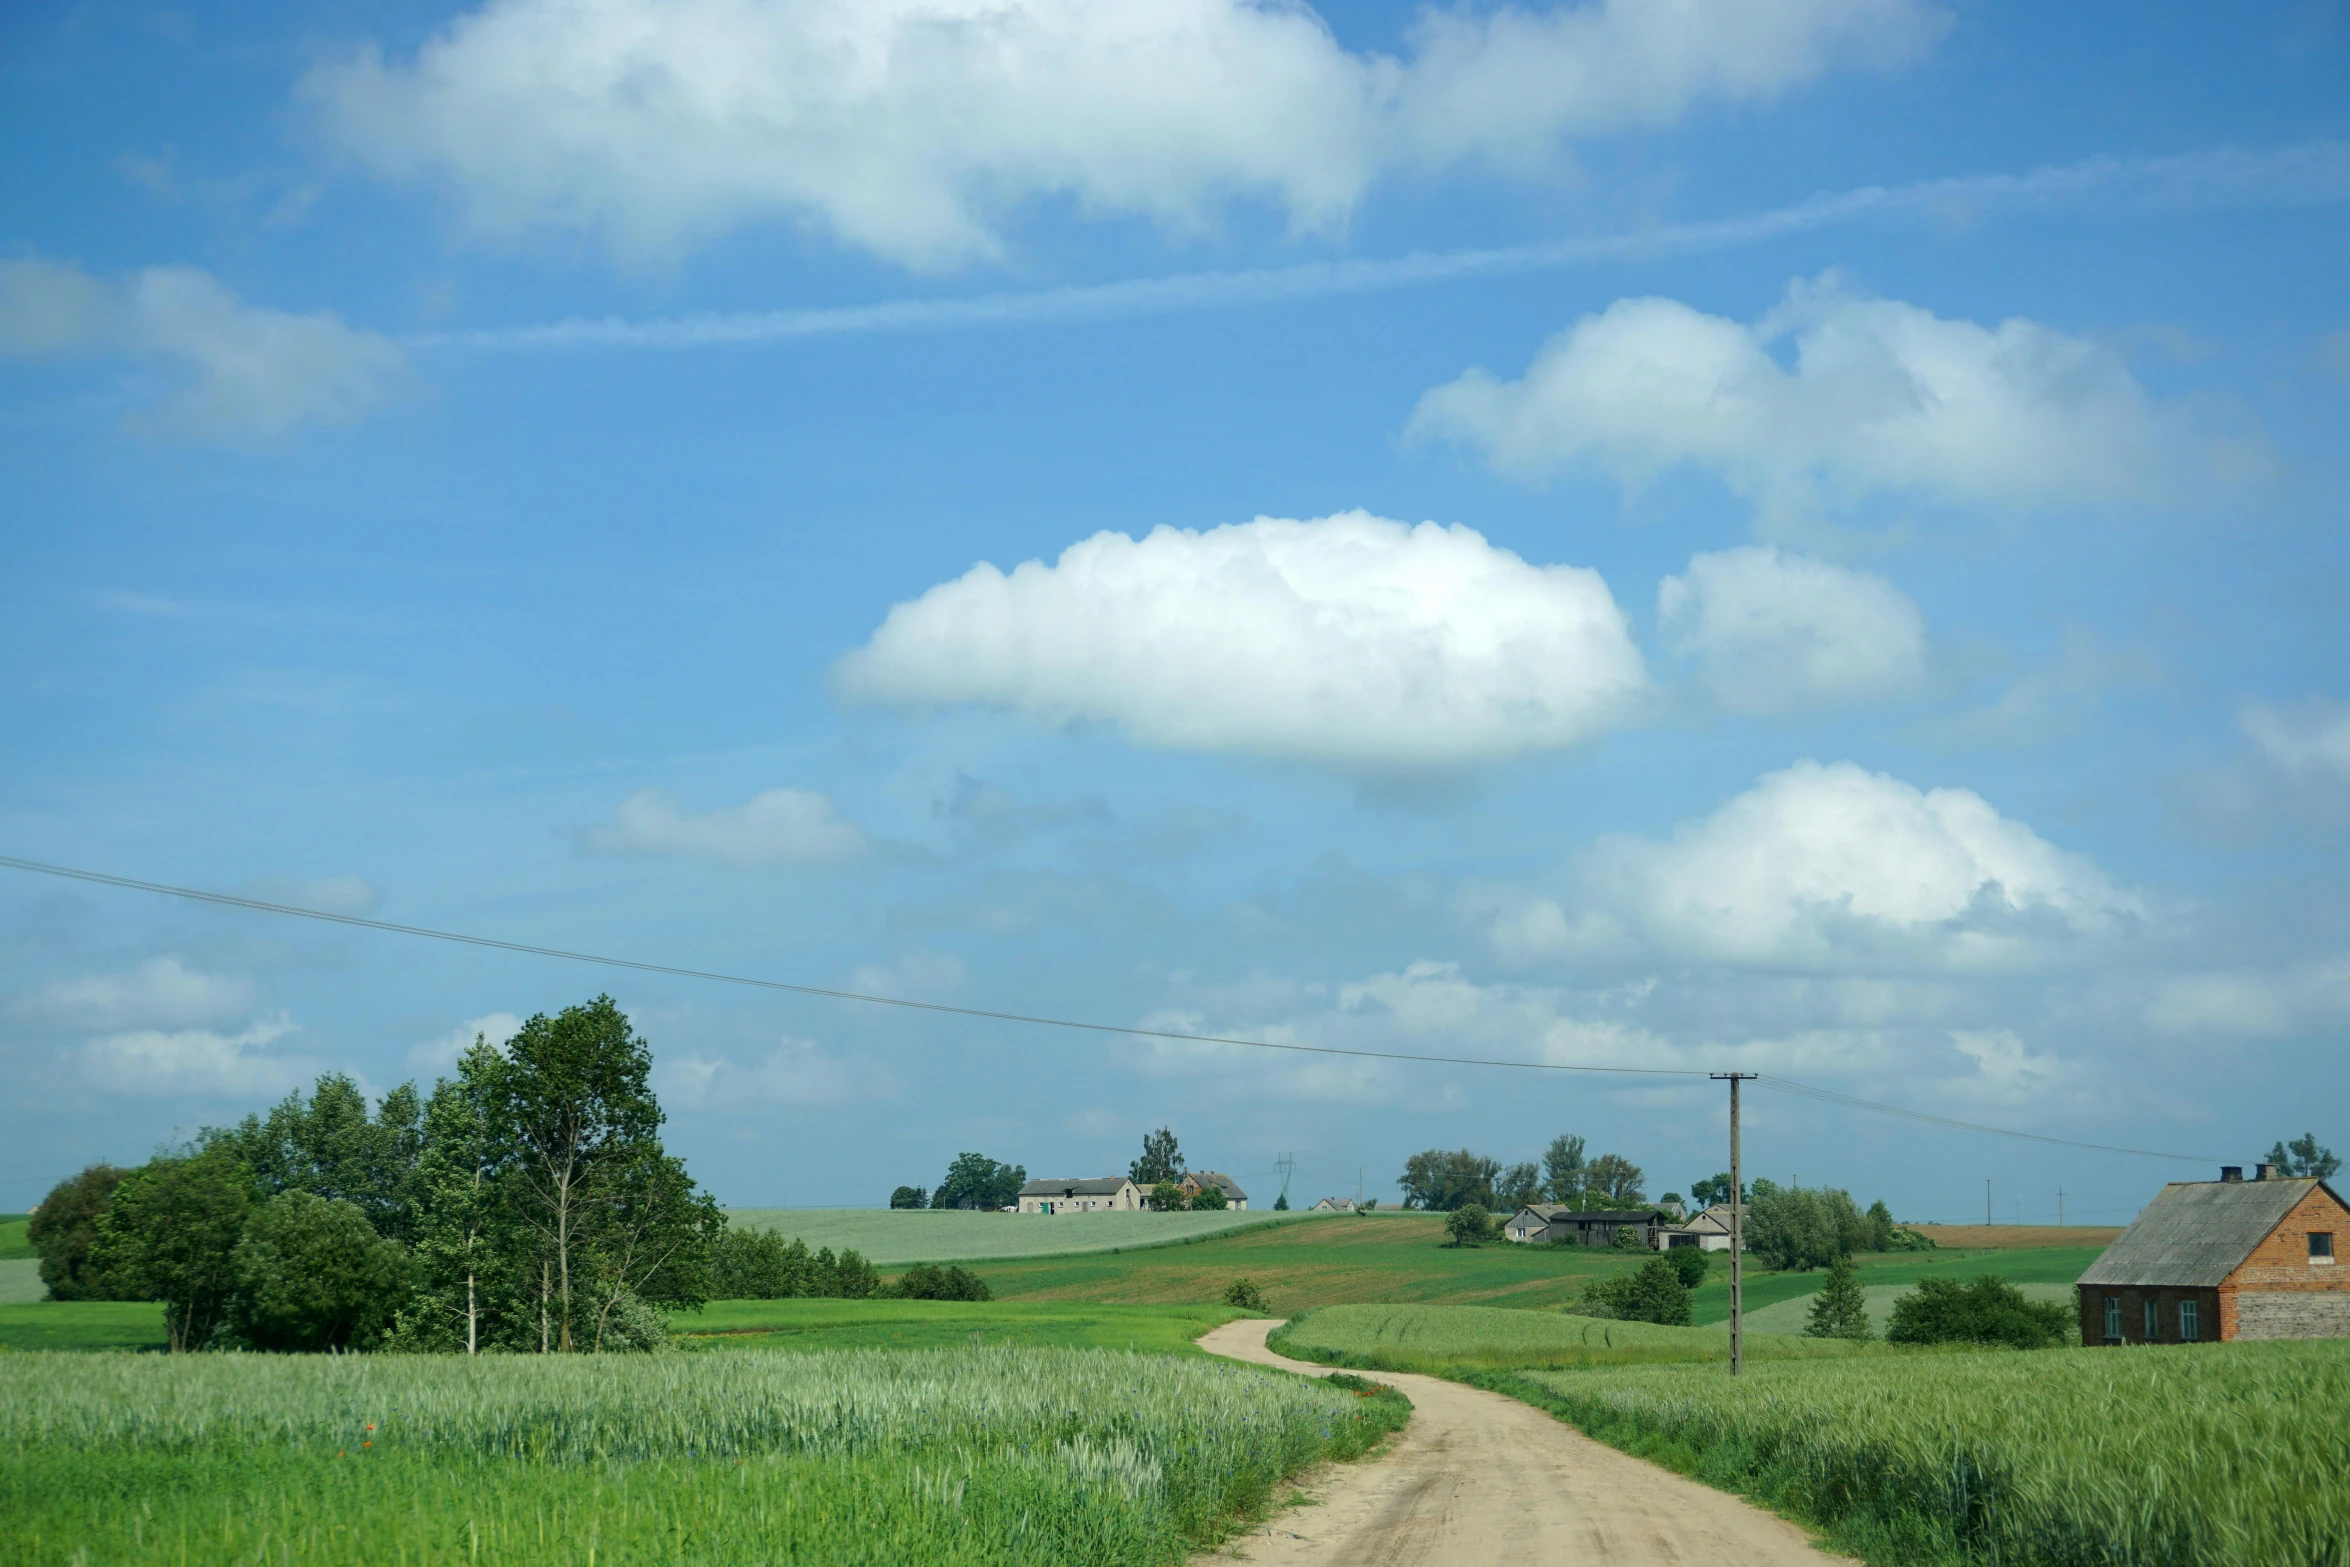 a road and a rural landscape under a cloudy blue sky